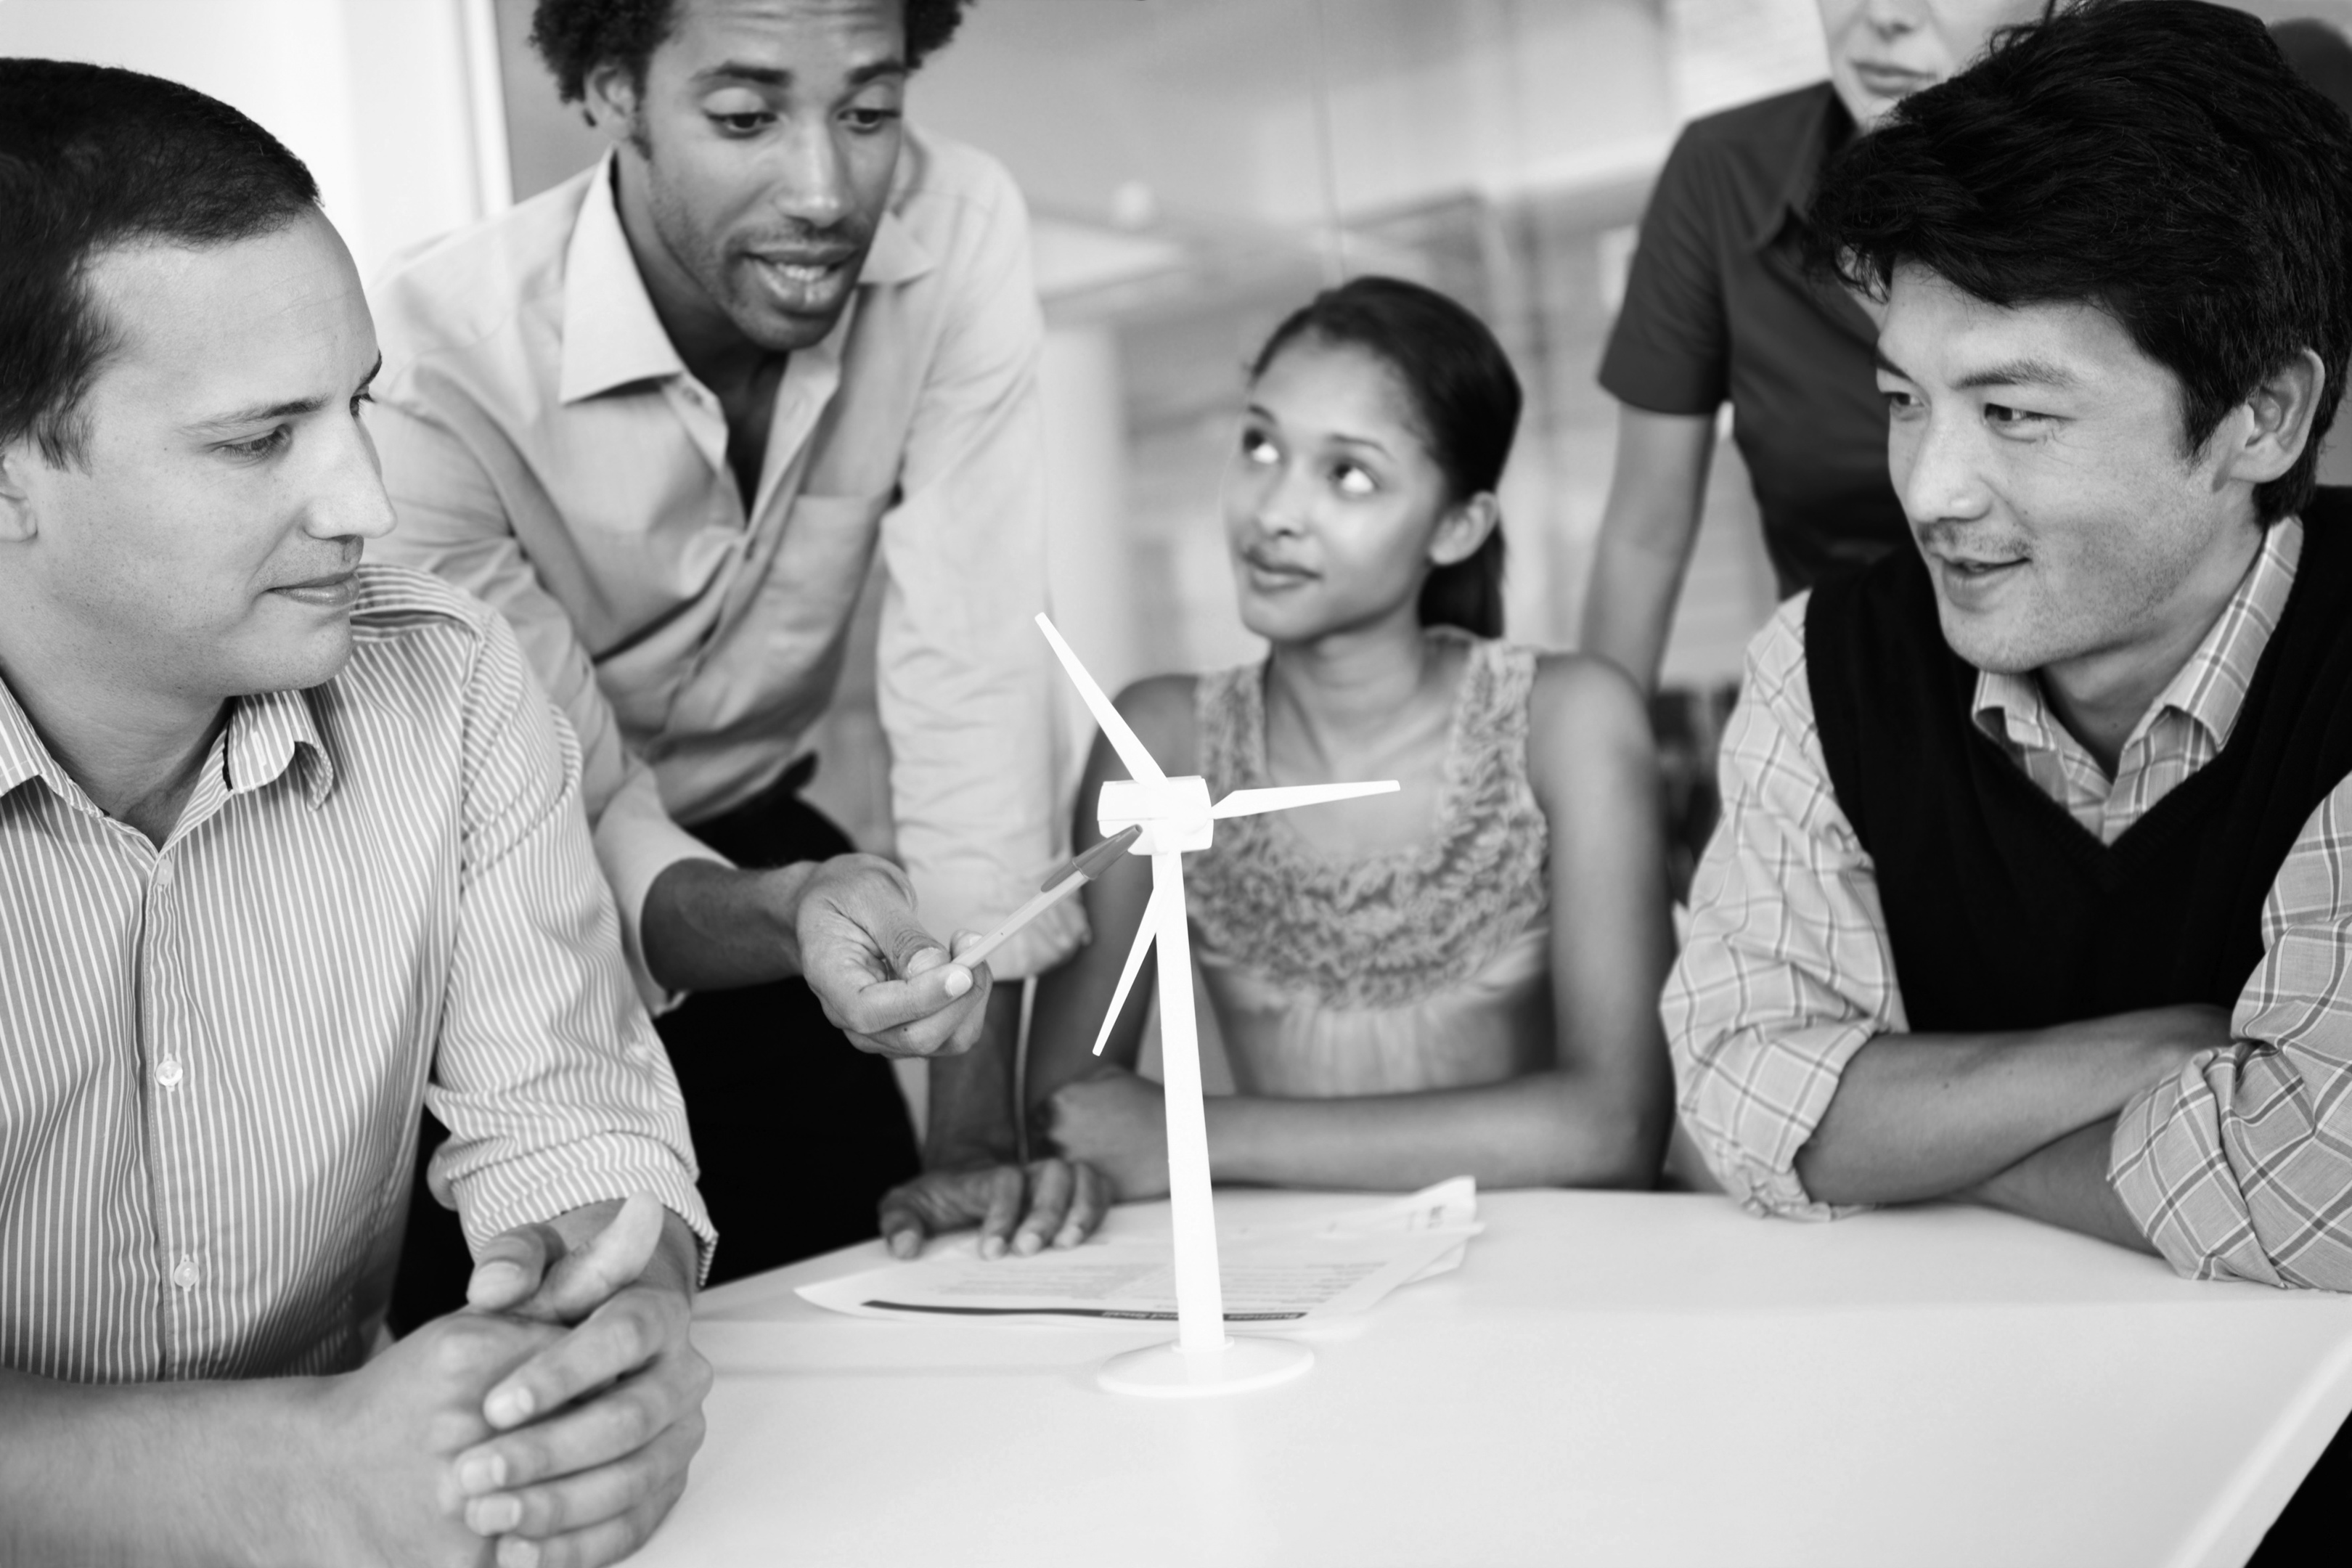 A team of engineers perfecting the design of their wind turbine